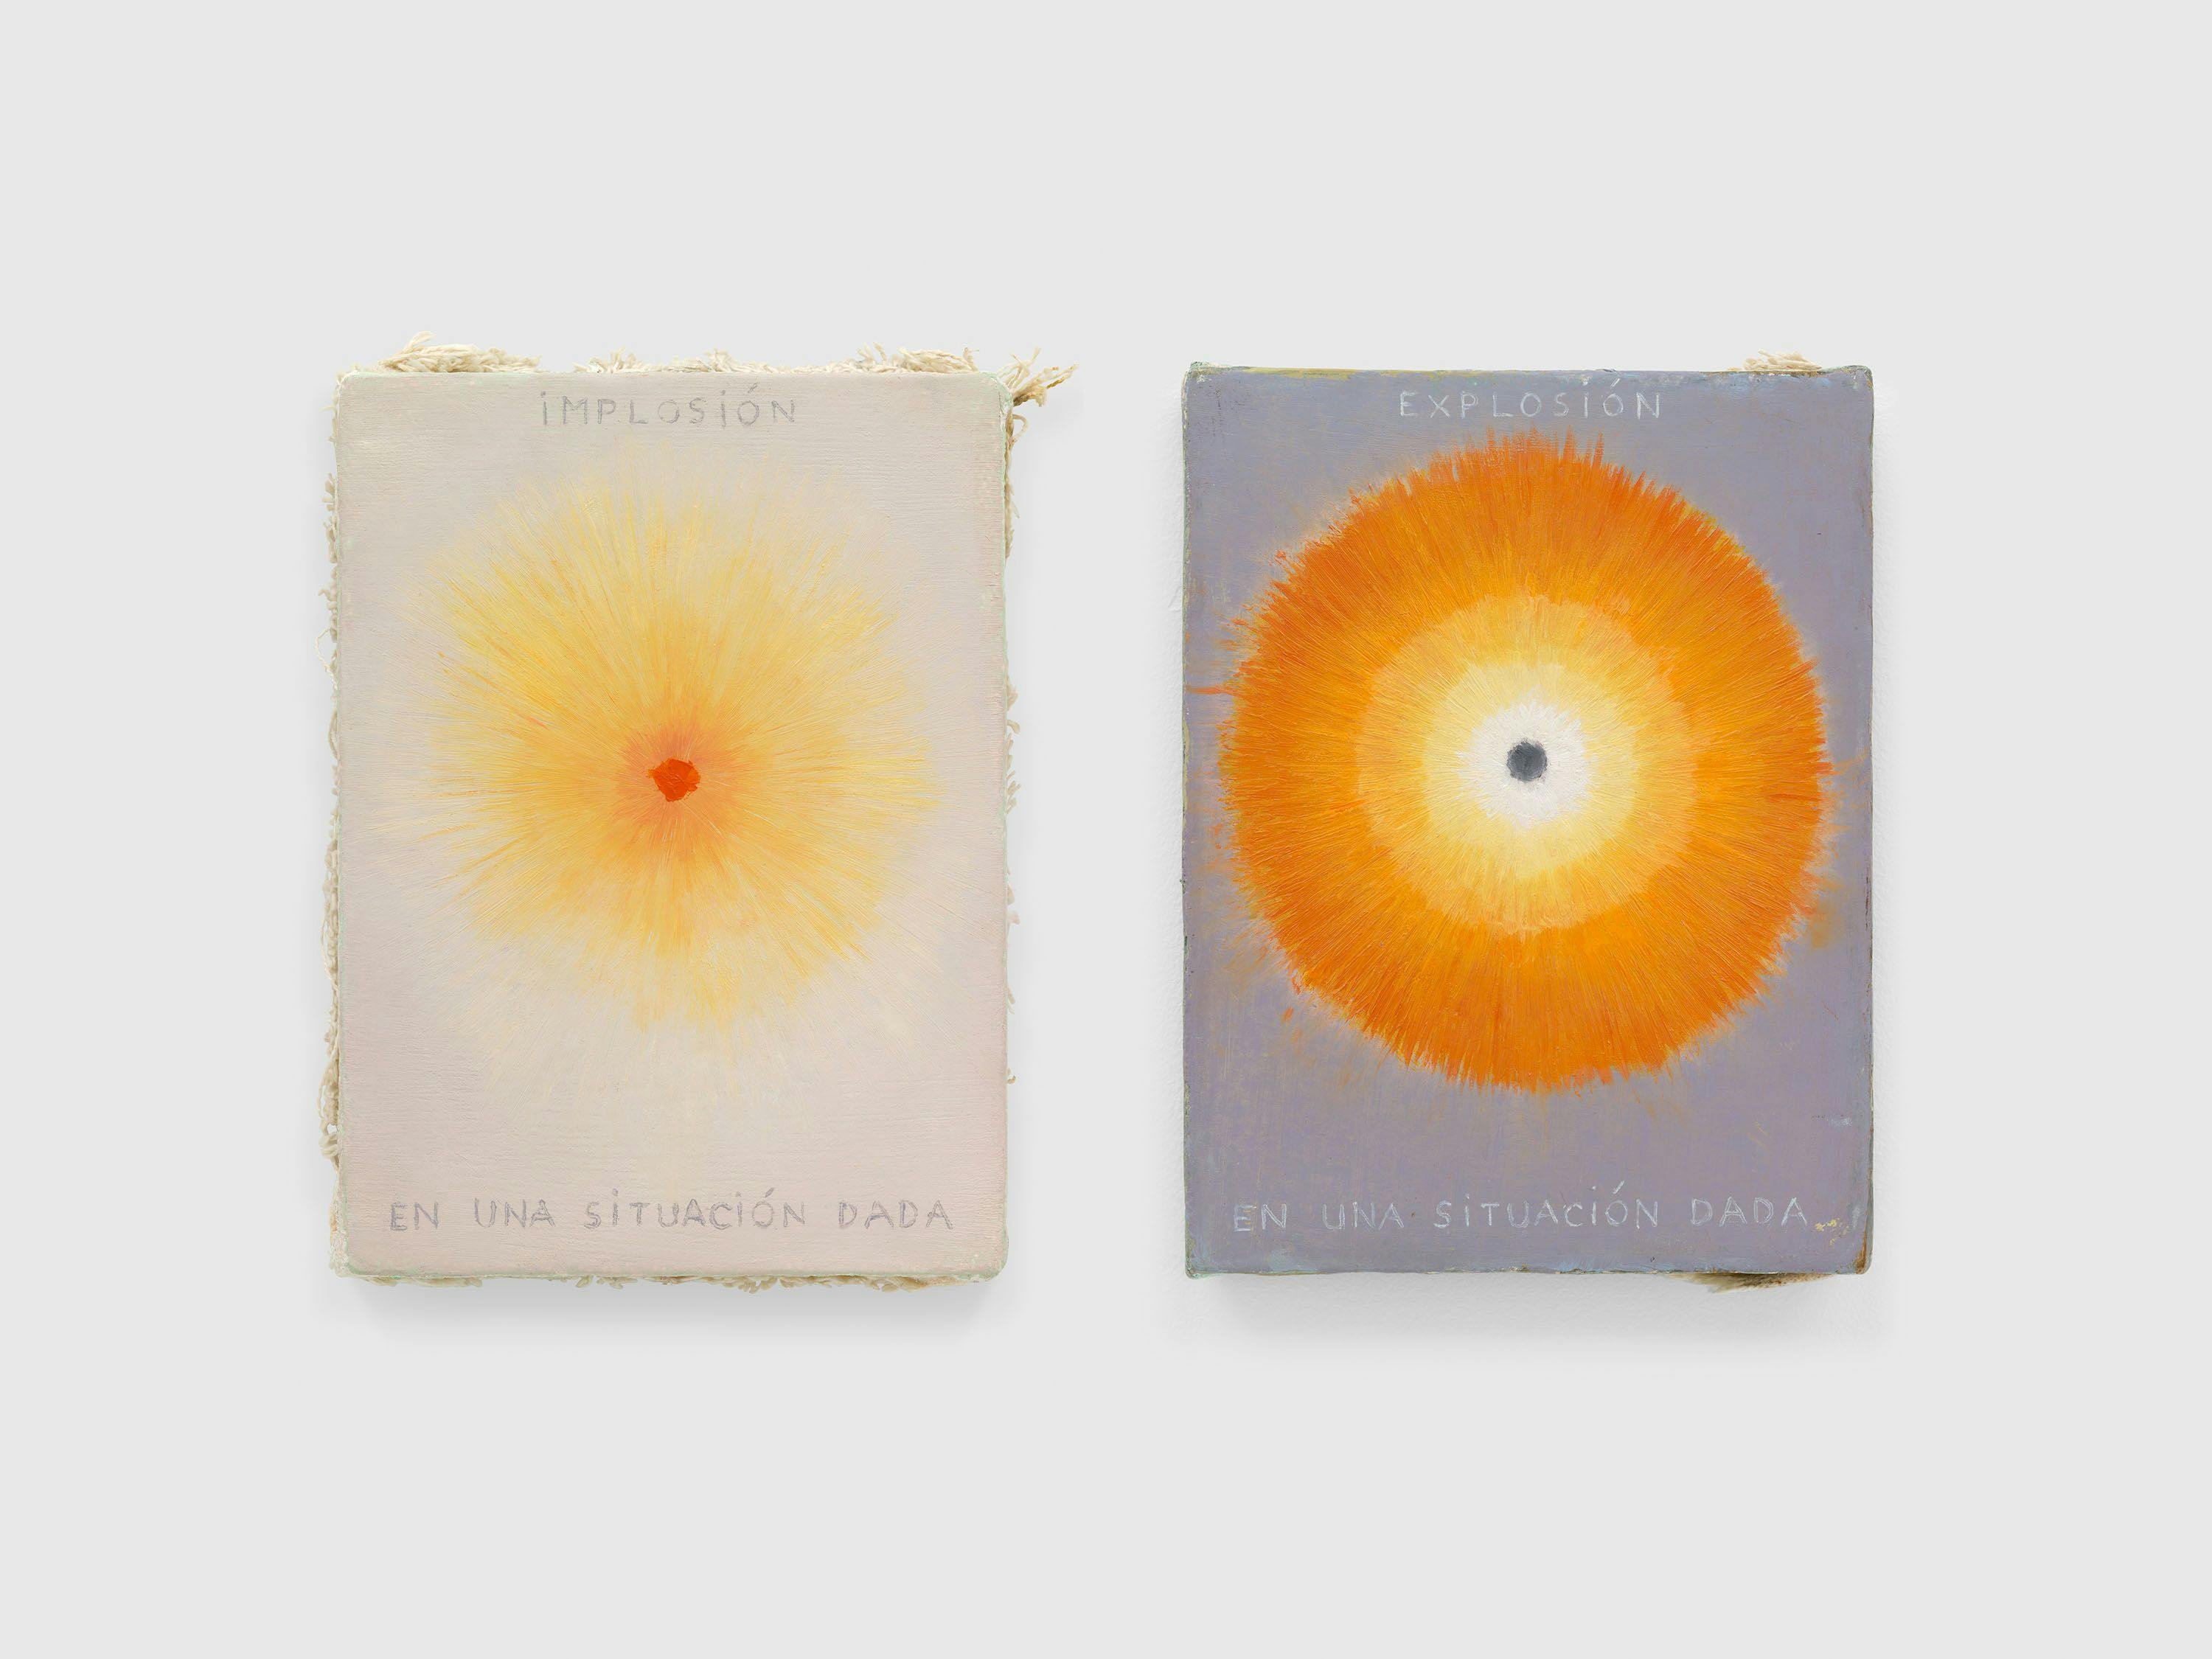 An installation by Francis Alÿs, titled Implosion/Explosion, dated 2009.